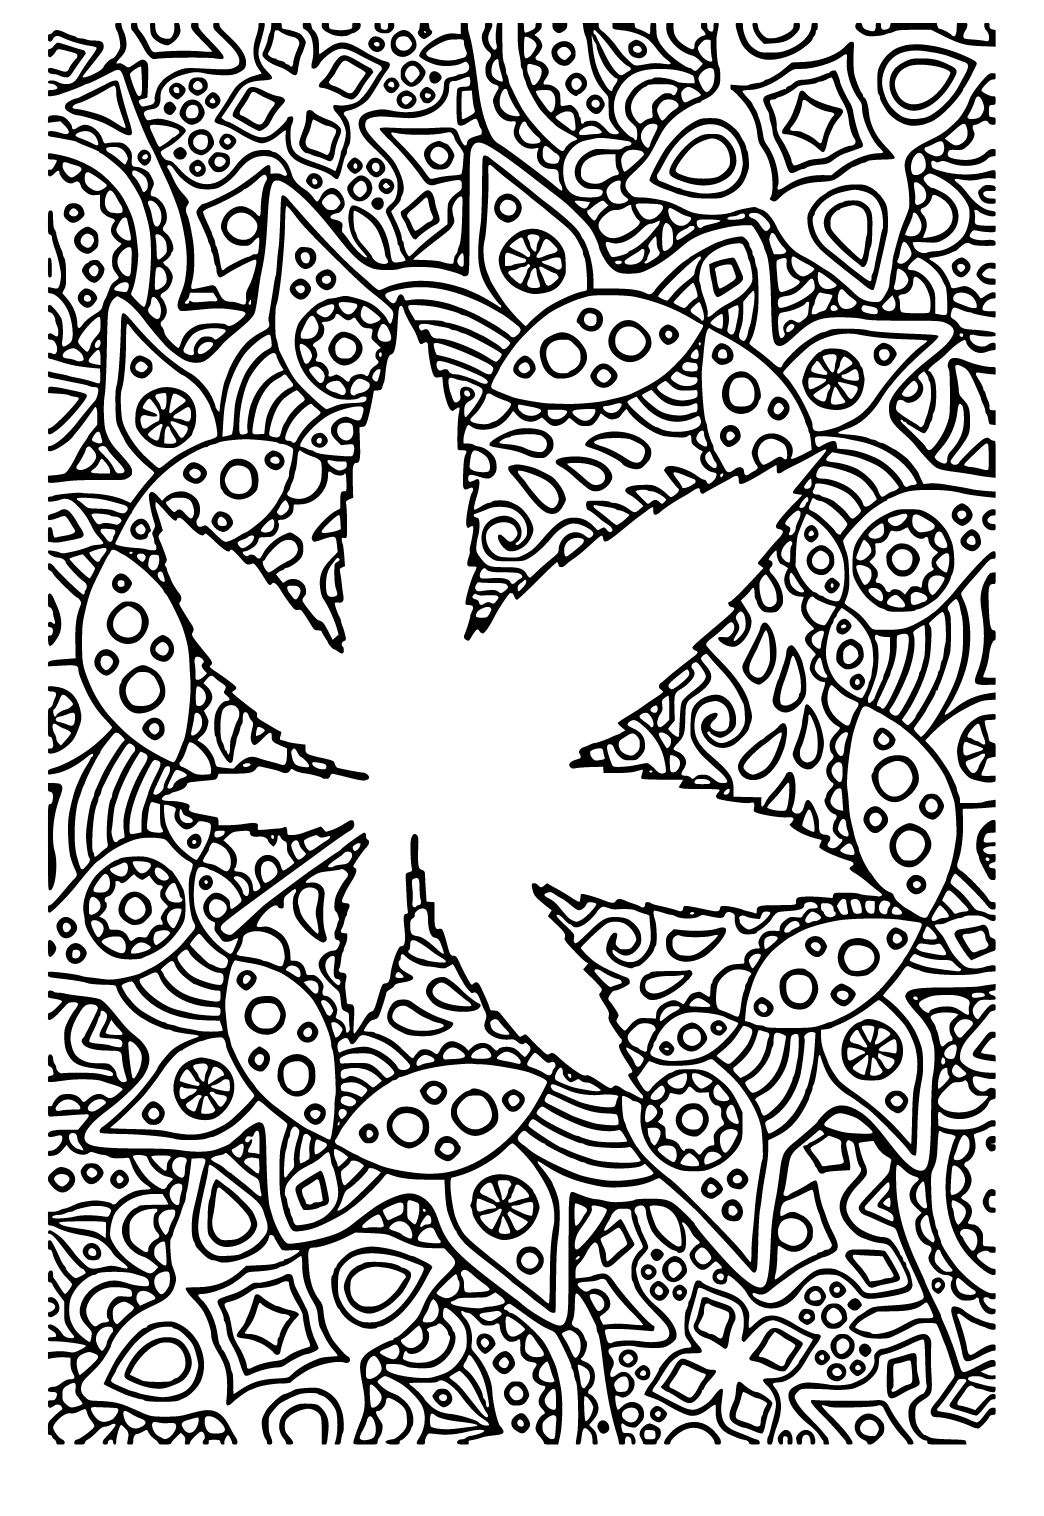 Free Printable Weed Difficult Coloring Page, Sheet And Picture For Adults  And Kids (Girls And Boys) - Babeled.Com